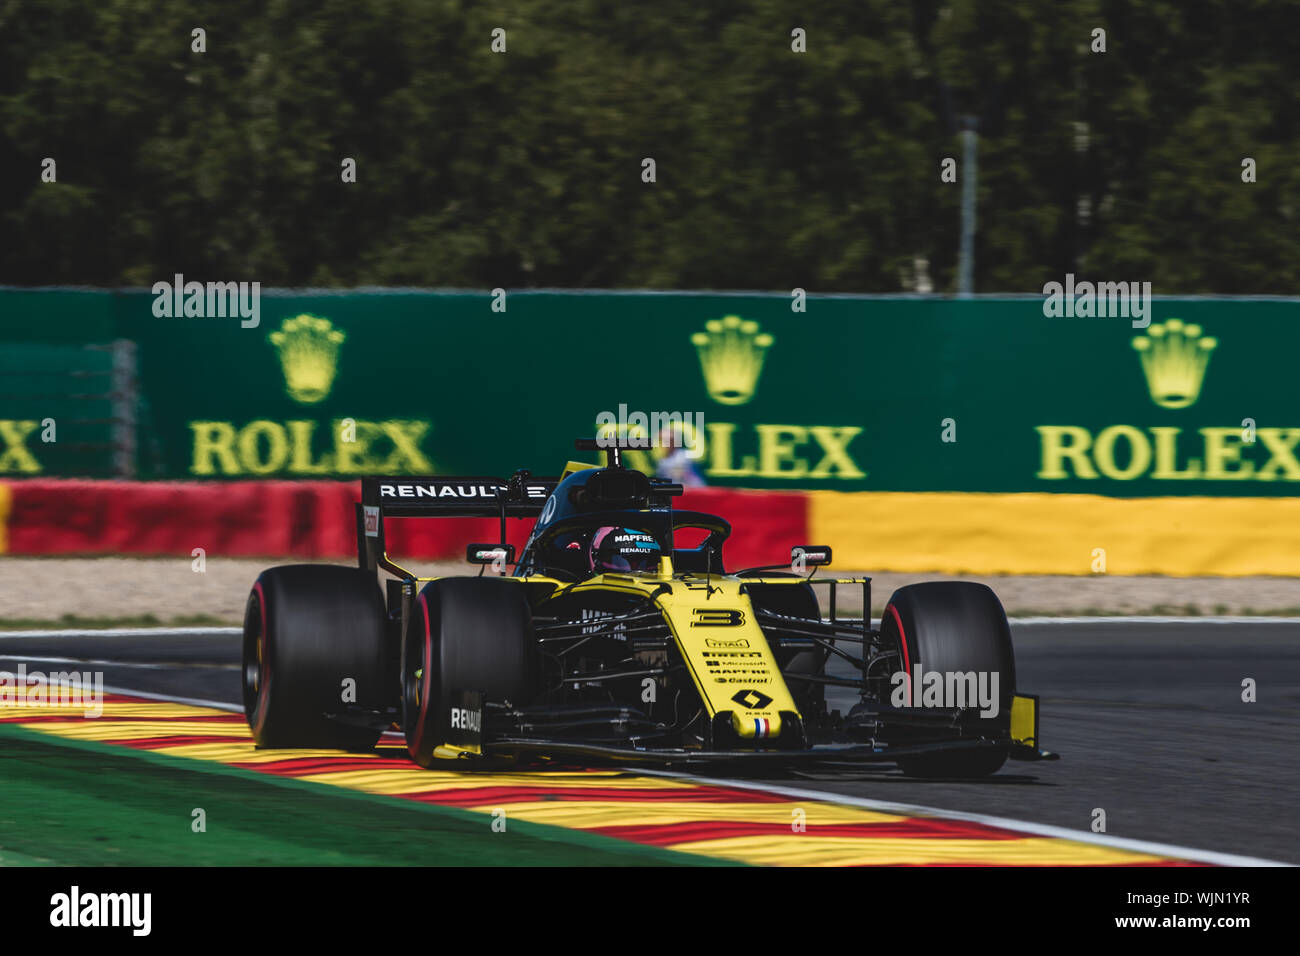 #3, Daniel Ricciardo, AUS, Renault,  in action during the Belgian Grand Prix at Spa Francorchamps Stock Photo